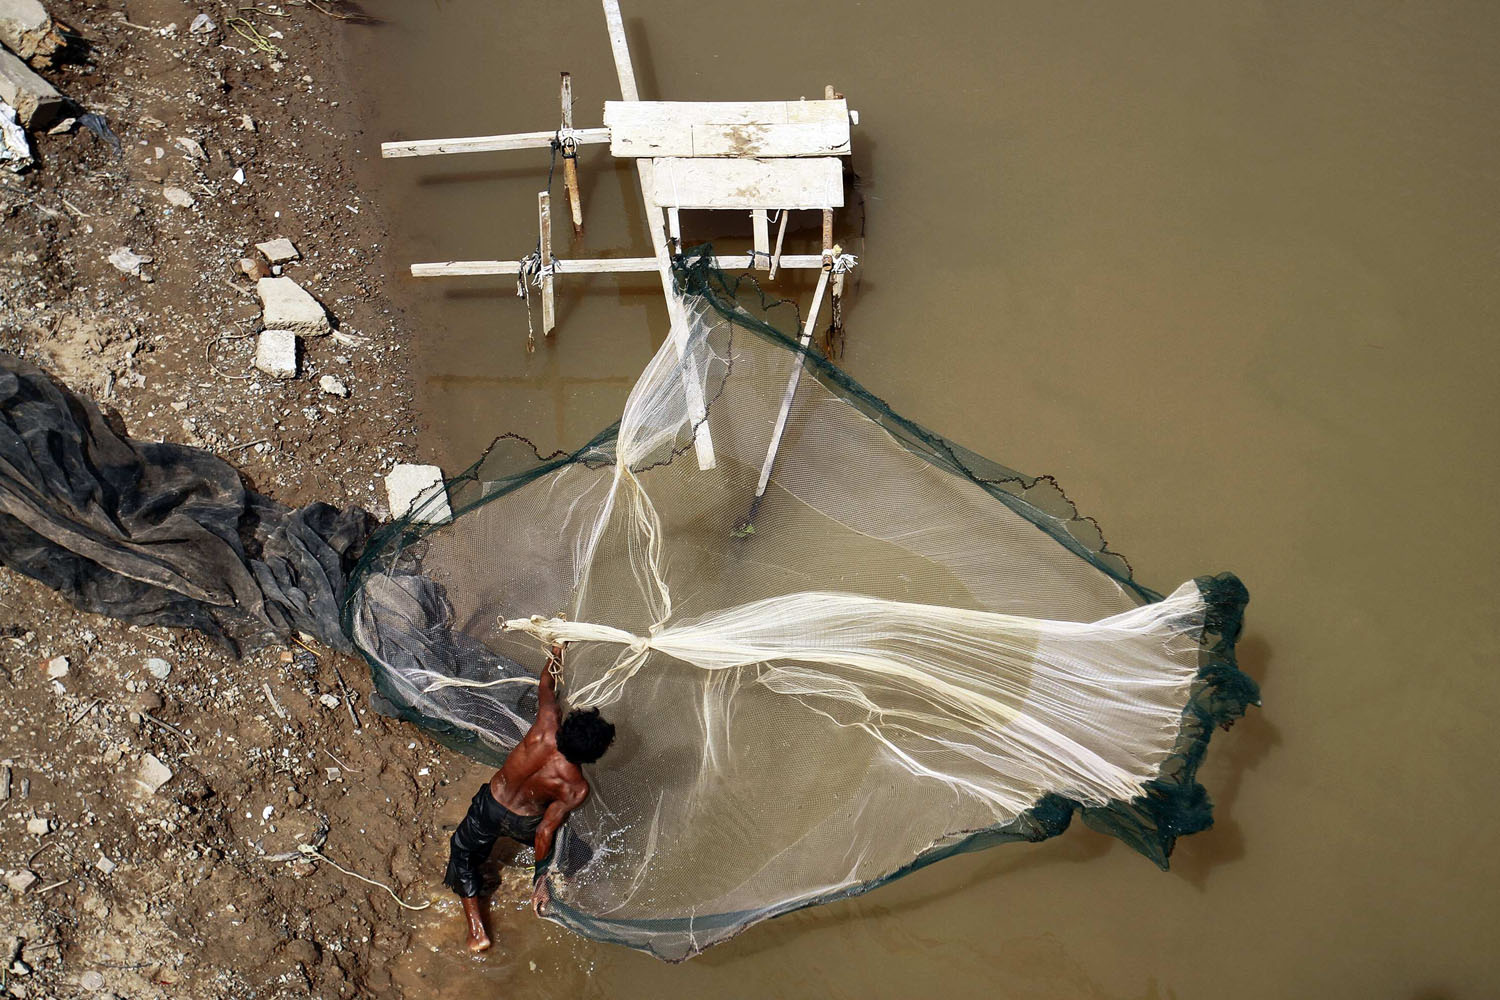 Image: Nov. 7, 2012. A fisherman casts his net in the Mekong river in Phnom Penh.